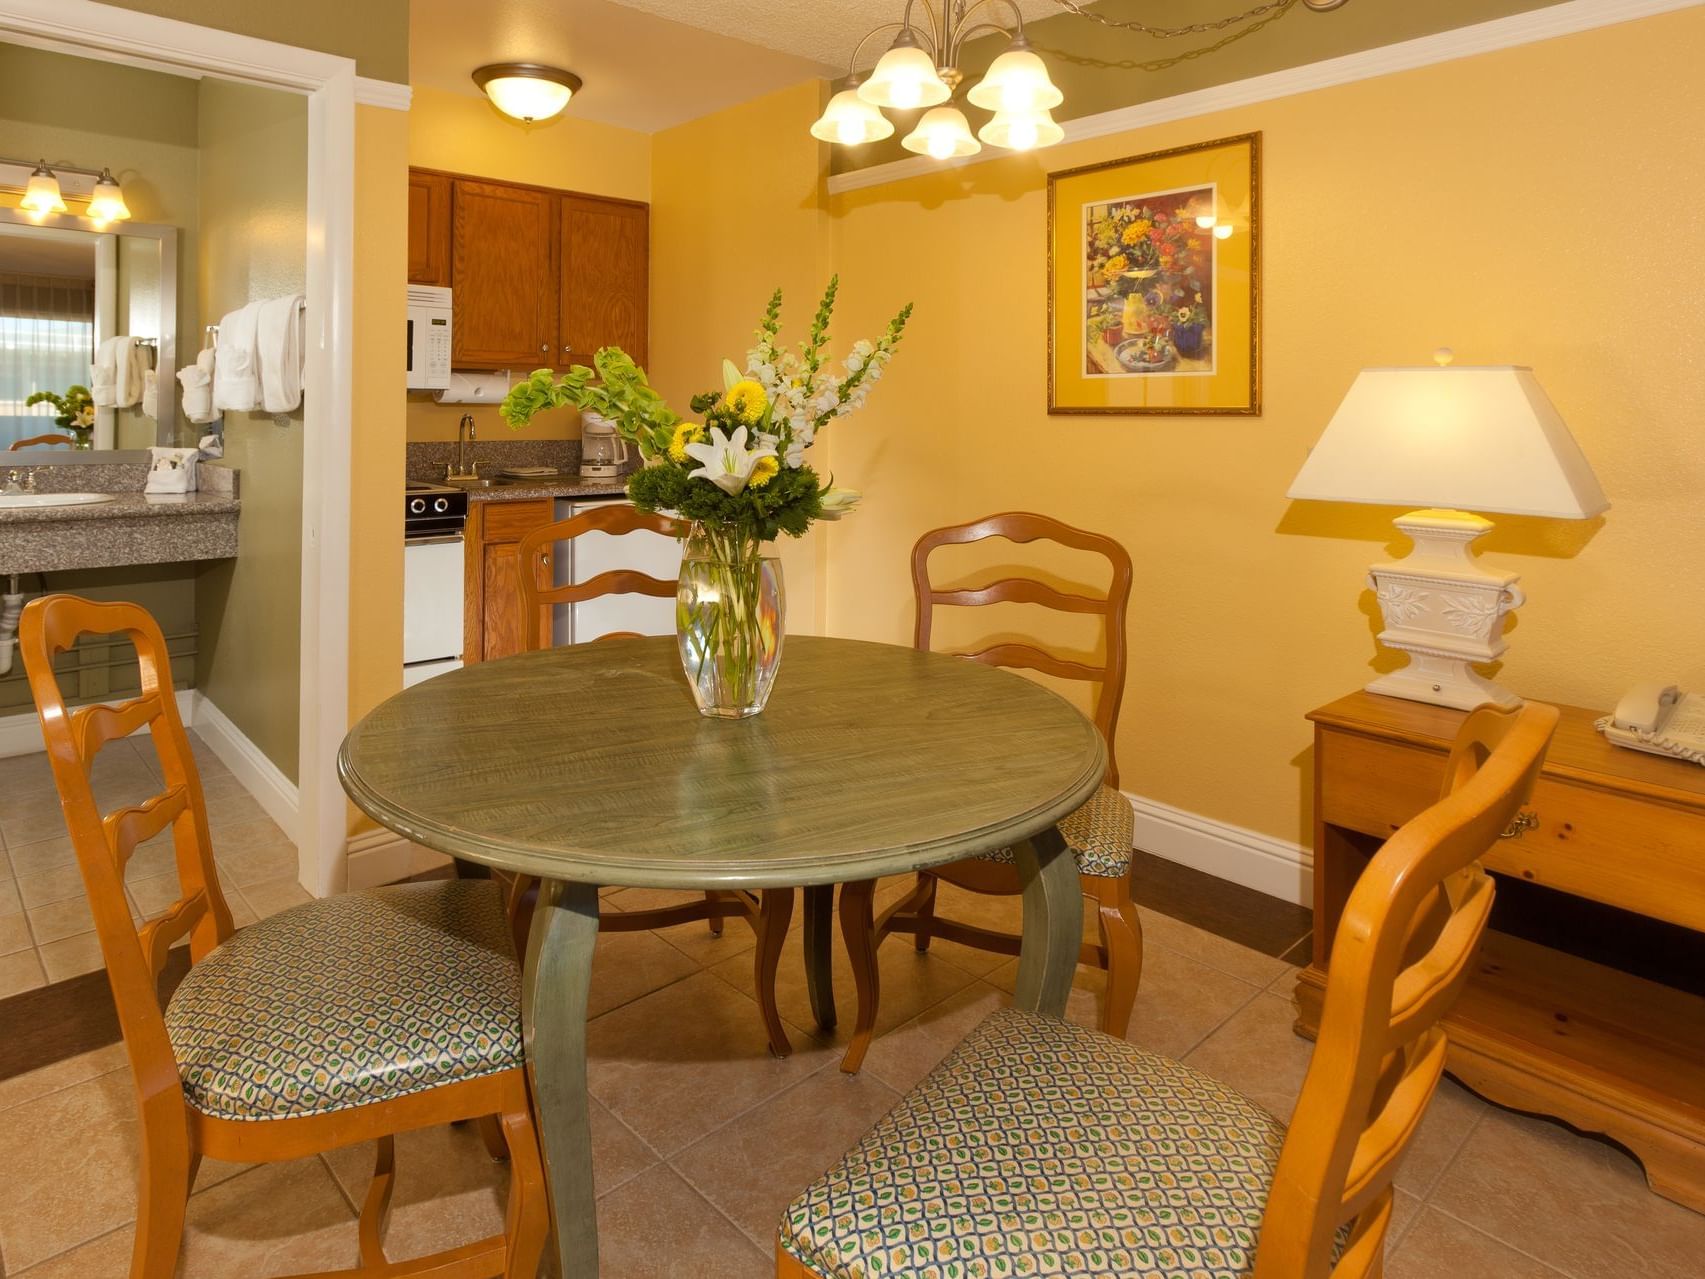 Dinning area in one bedroom suite at Legacy Vacation Resorts